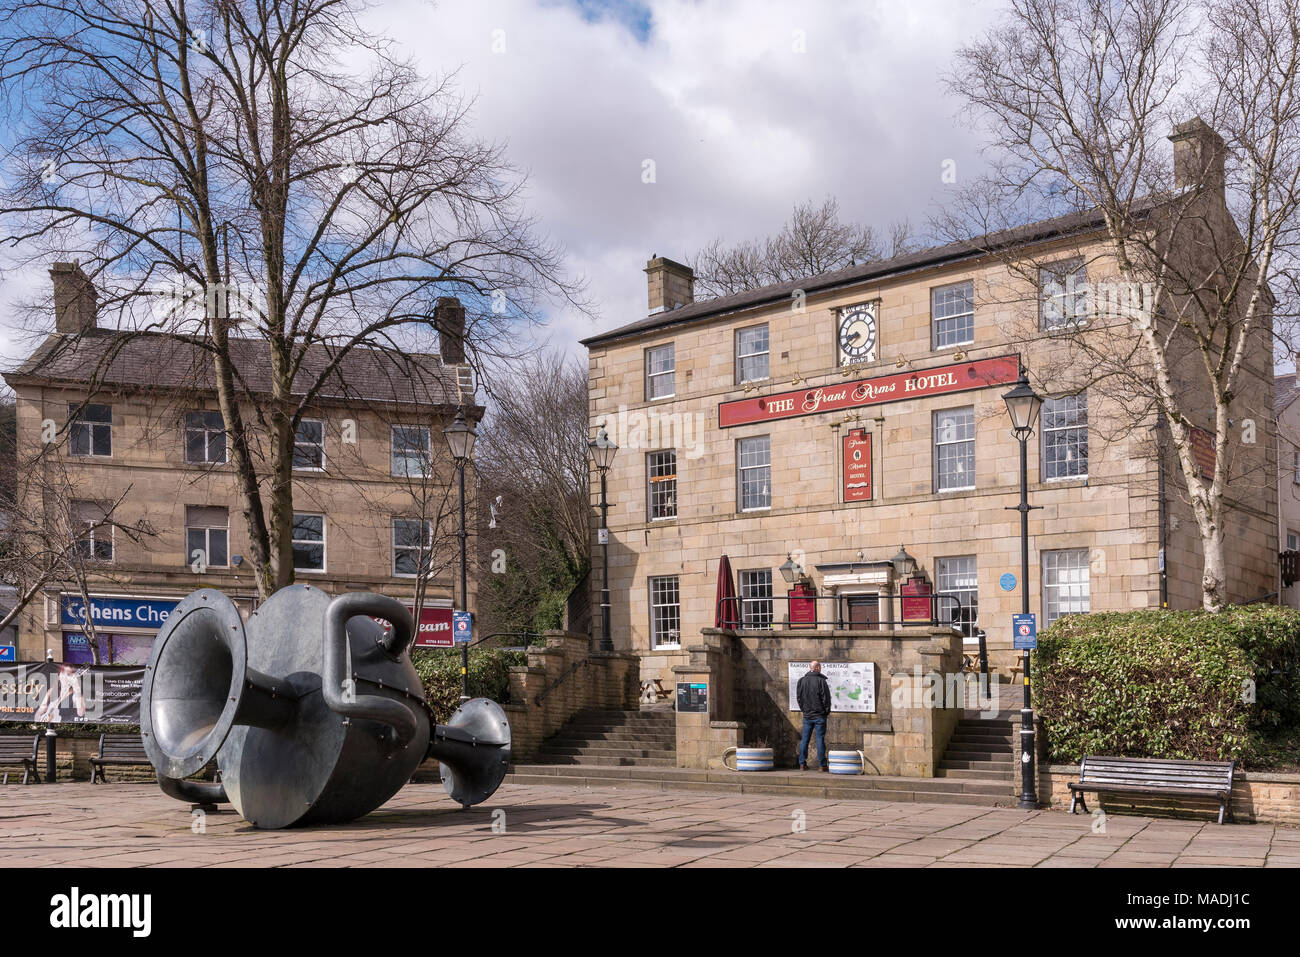 The Market Place in Ramsbottom with large water jug sculptrure part of the Irwell Valley sculpture trail. The Grant Arms hotel. Stock Photo